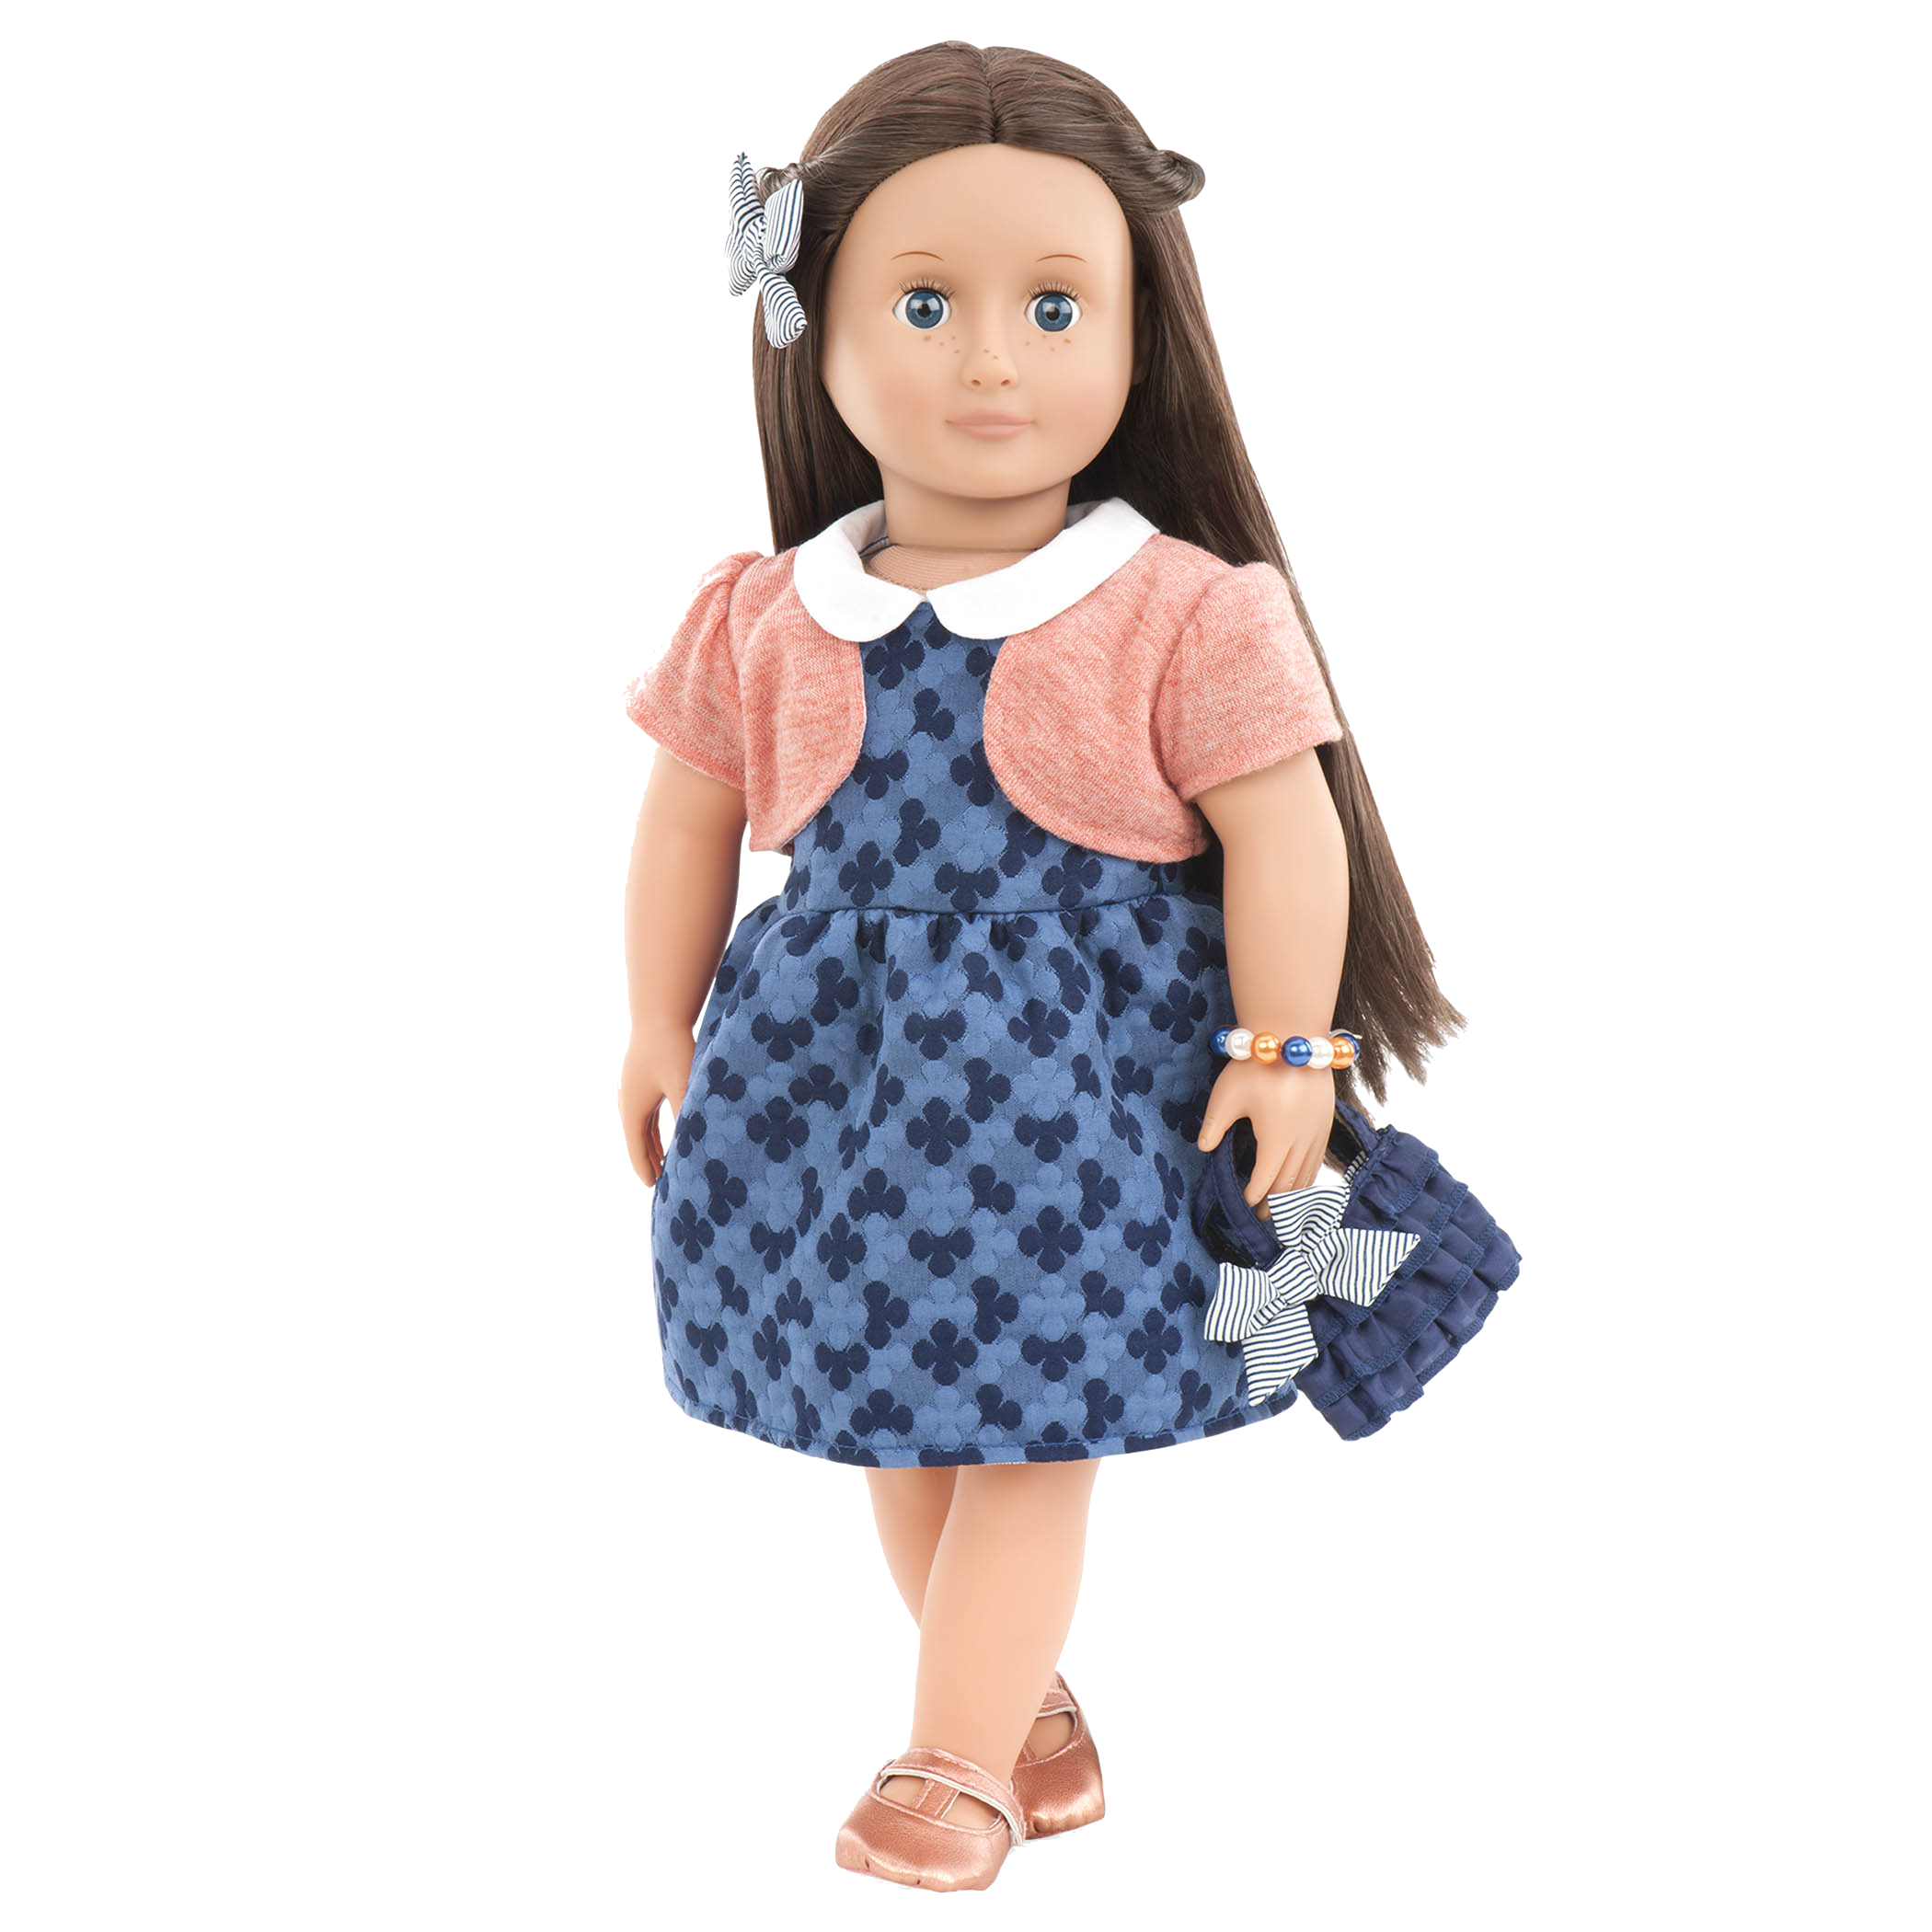 Handemade  blue and white check dress fully lined to fit our generation doll 